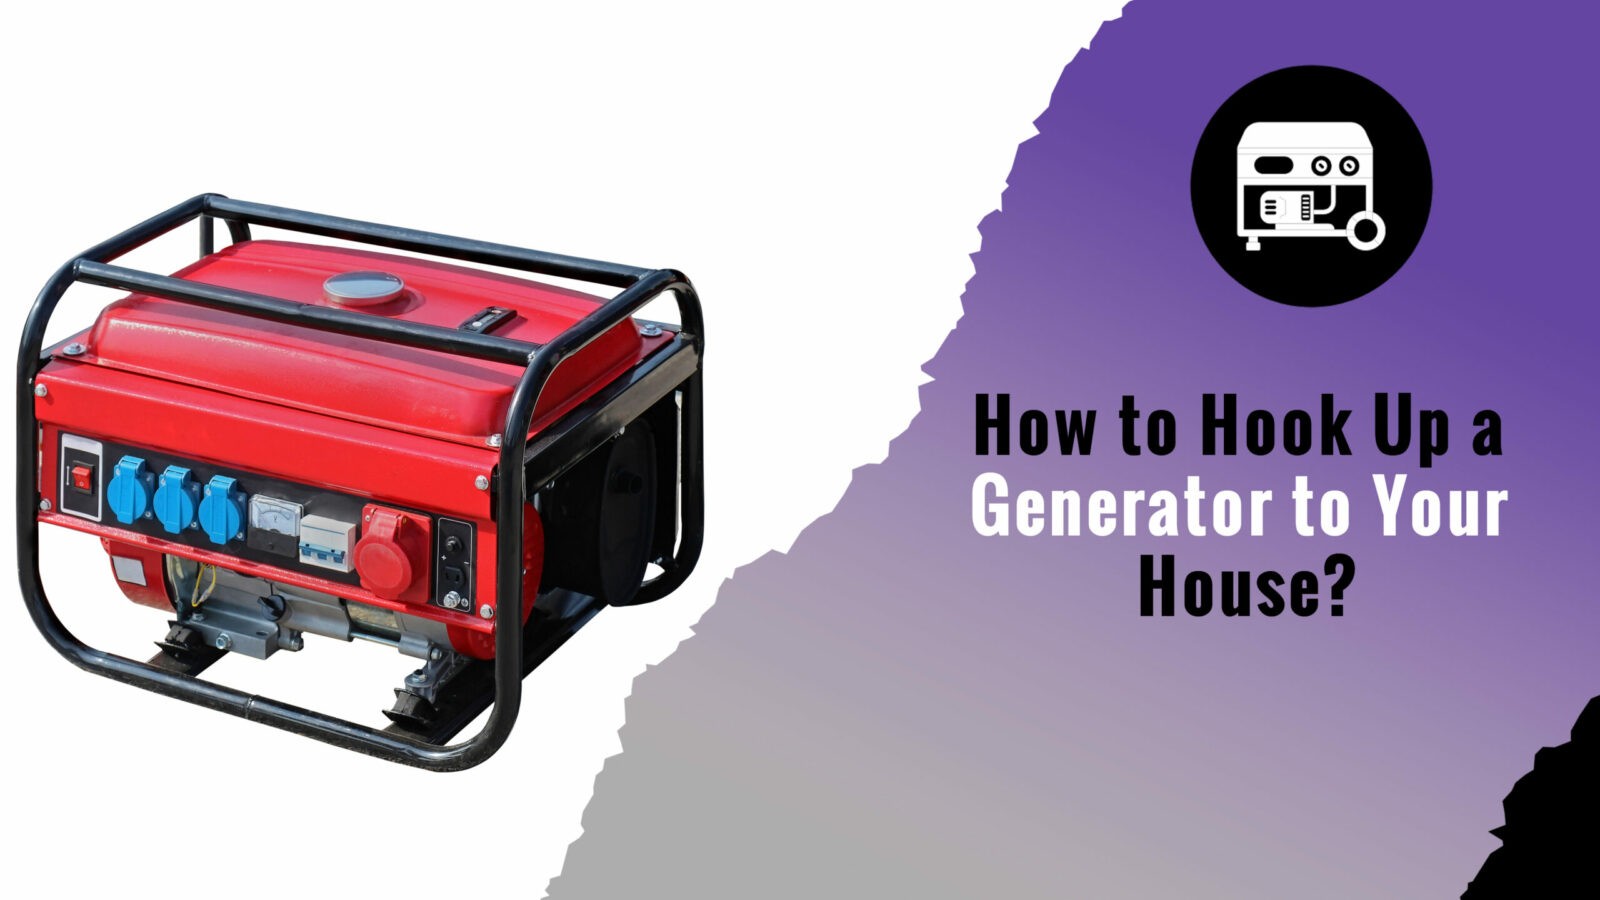 How to Hook Up a Generator to Your House